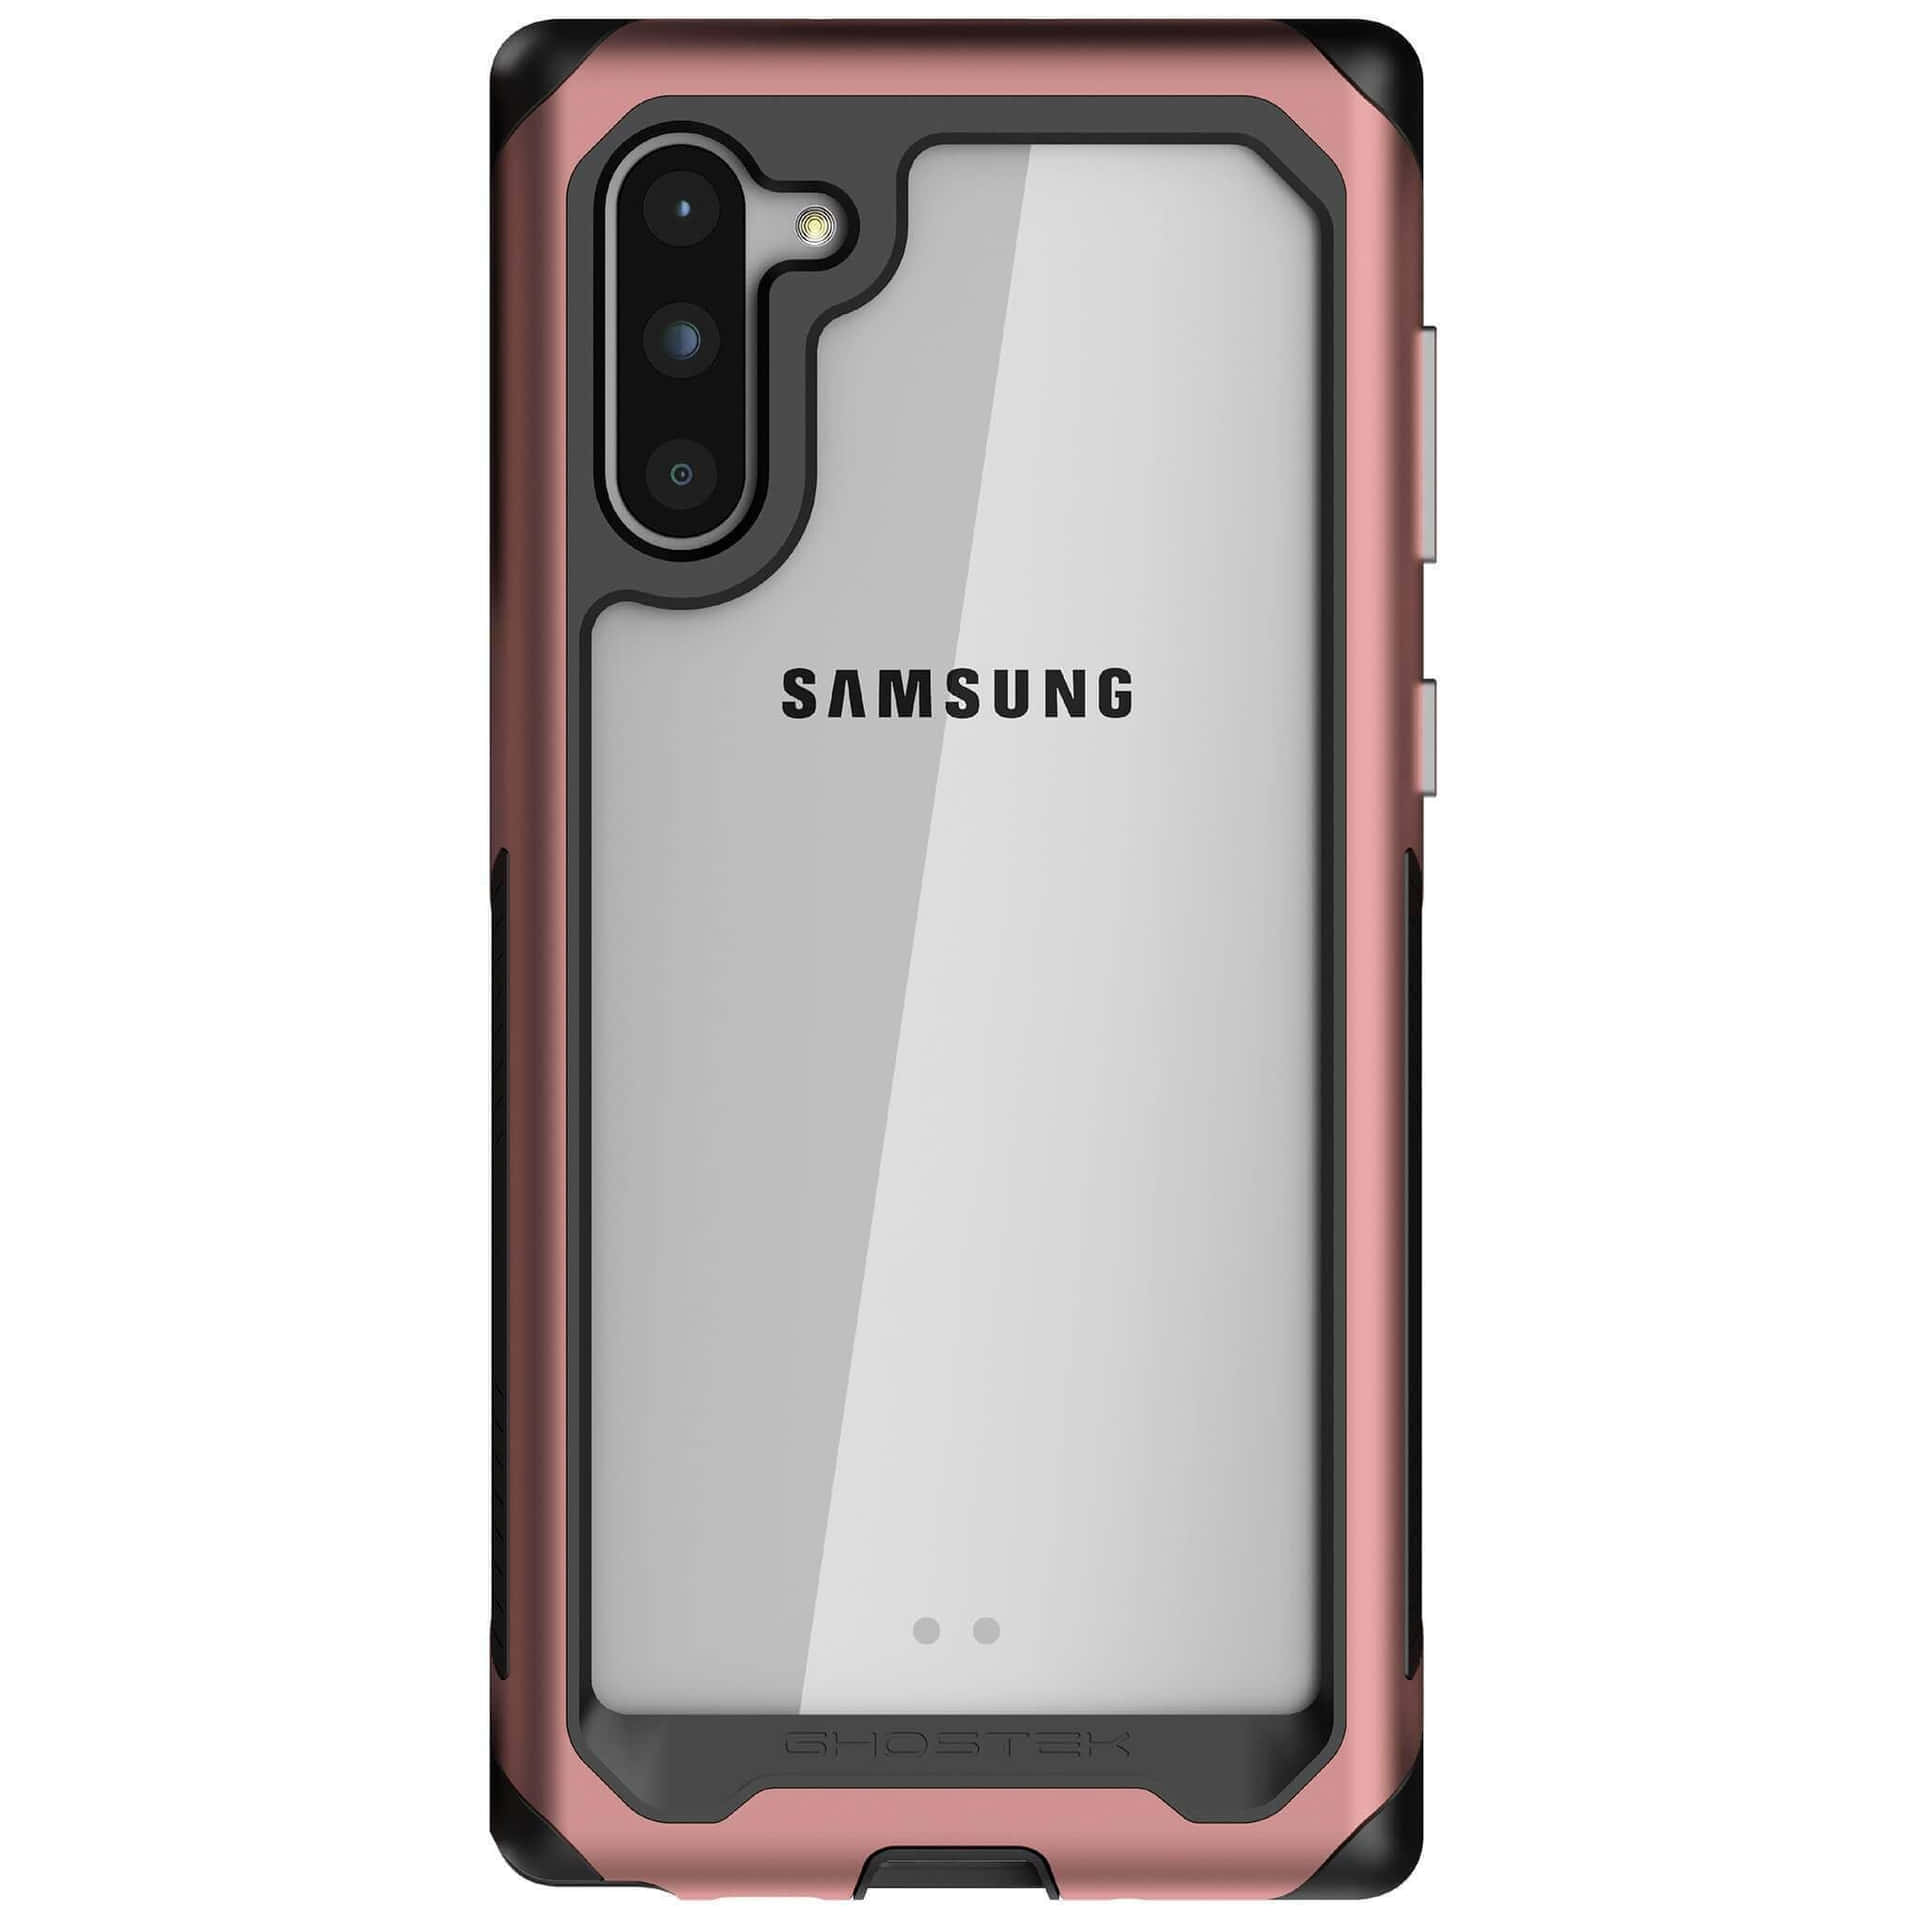 Samsung Galaxy Note 10 Case In Rose Gold